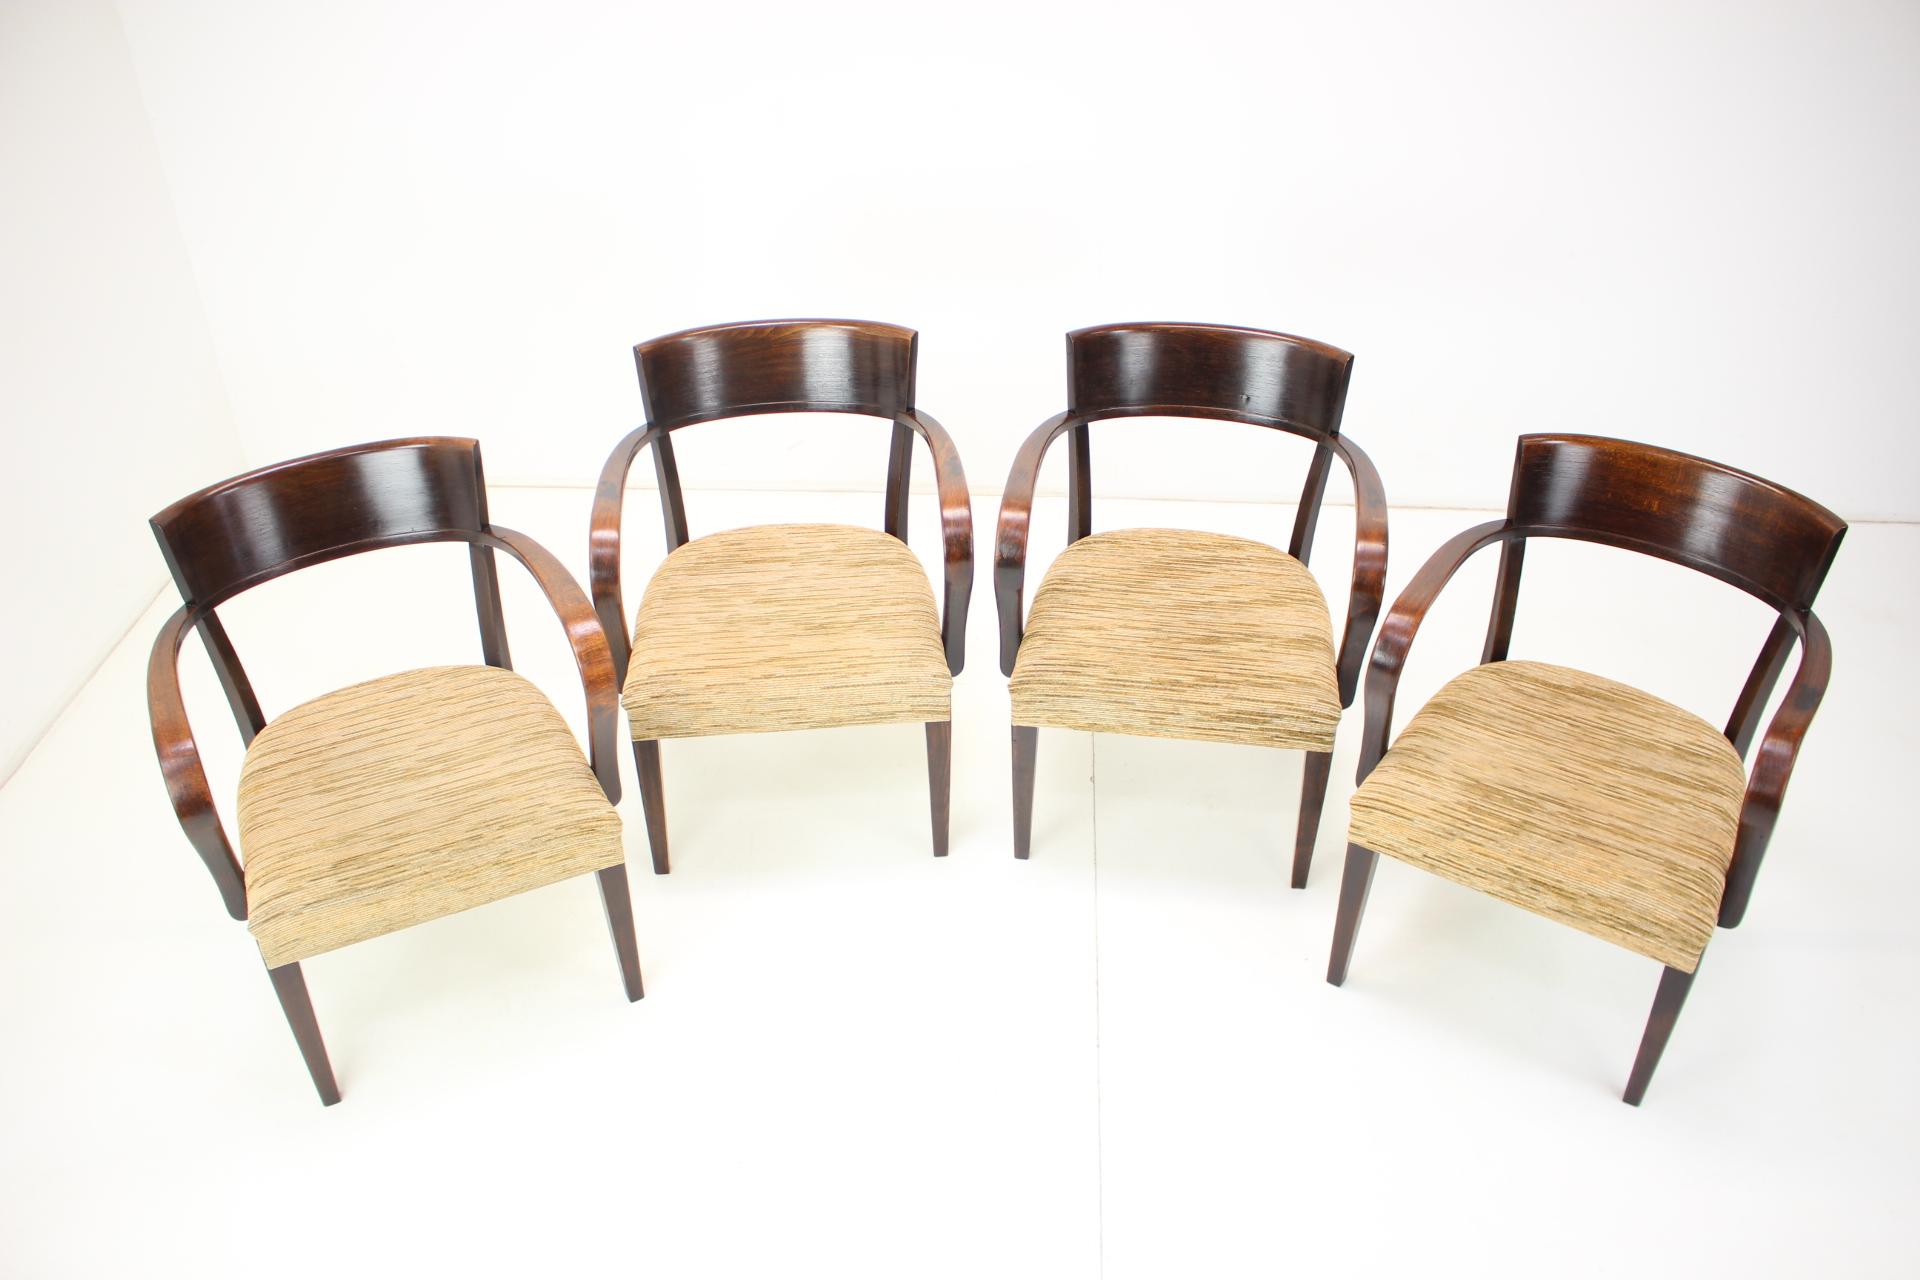 Rare Set of Four Catalog Chairs H-224 by Jindřich Halabala 1930s, Czechoslovakia For Sale 11